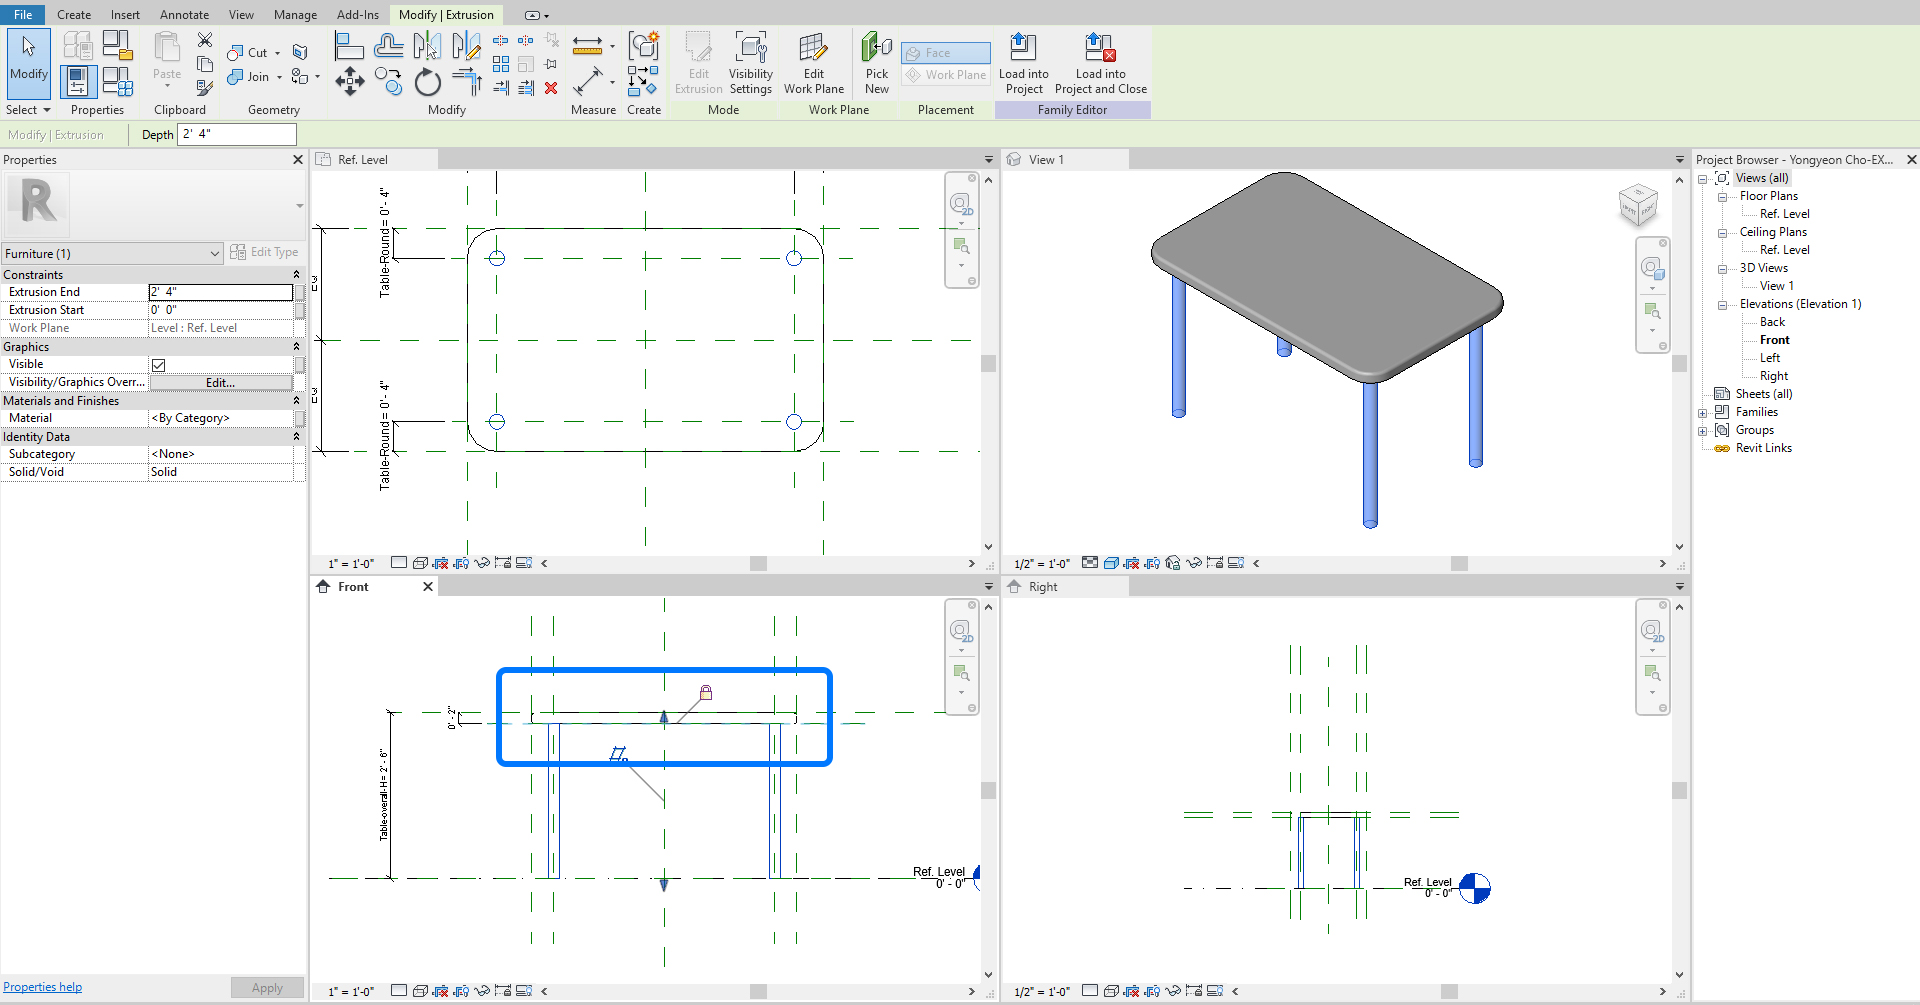 It indicates how to add table legs with parameters.